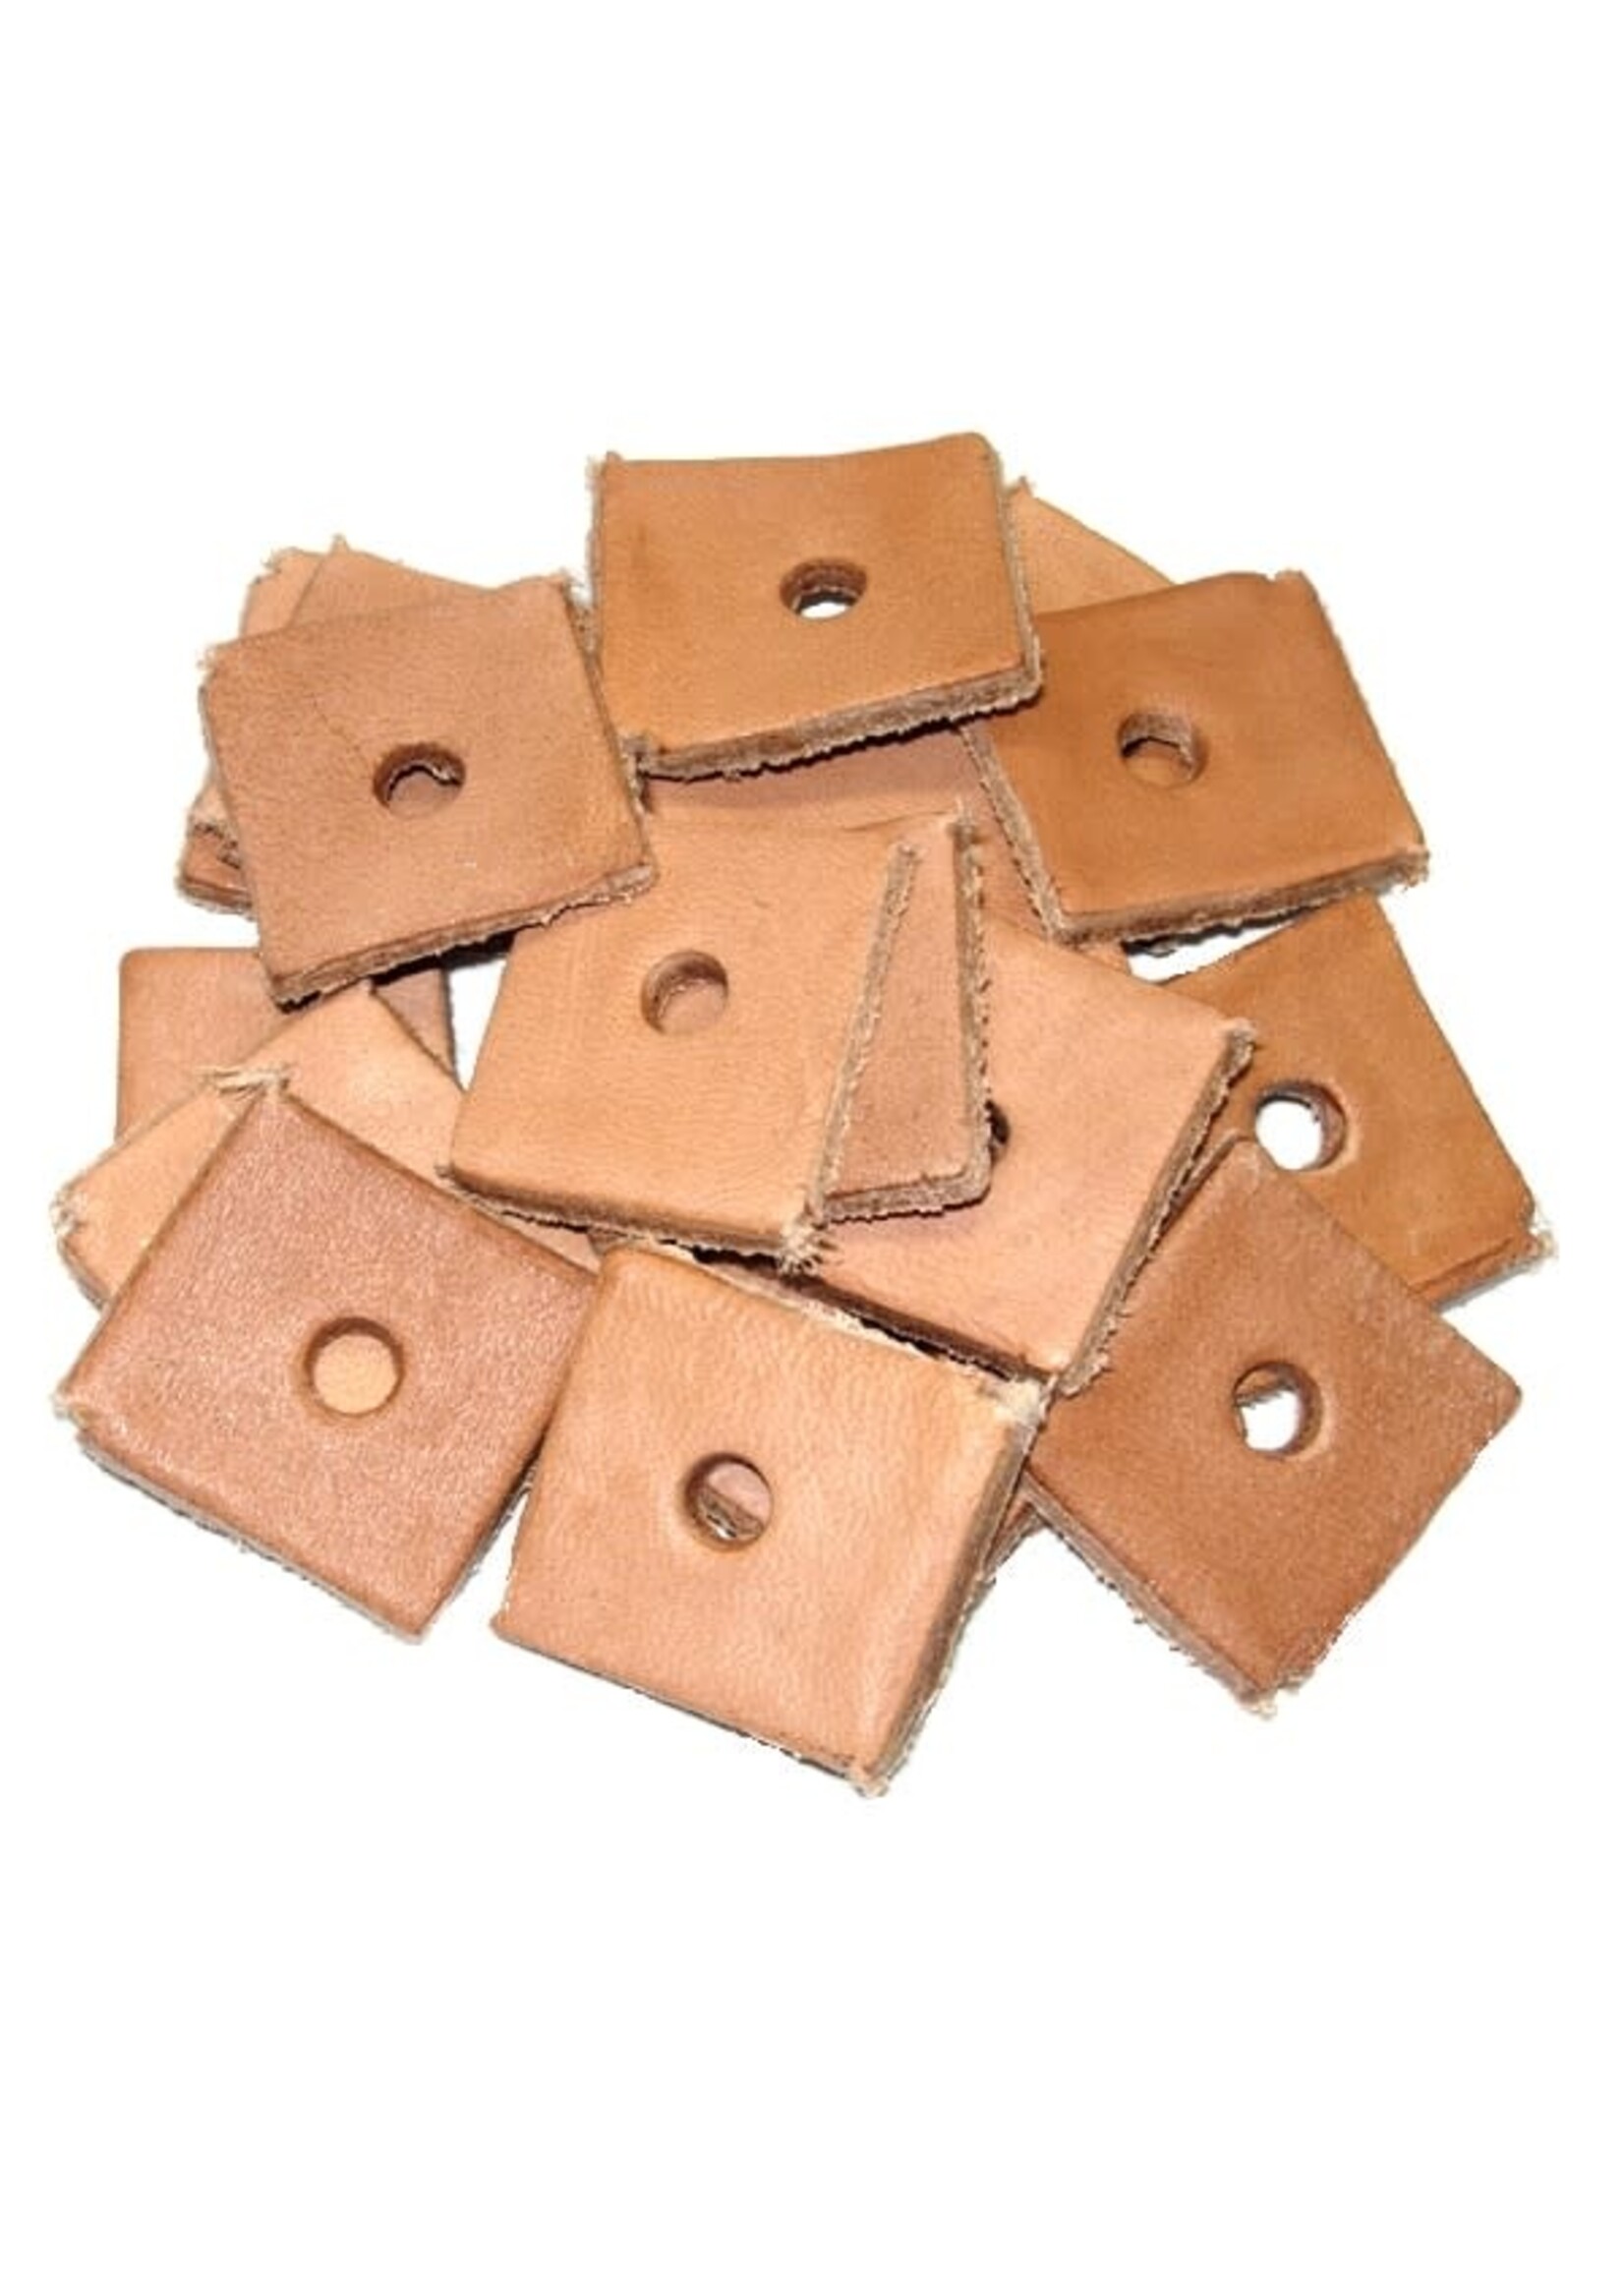 Zoo-Max Zoo-Max 20 pc 1 x 1” Leather Squares 228